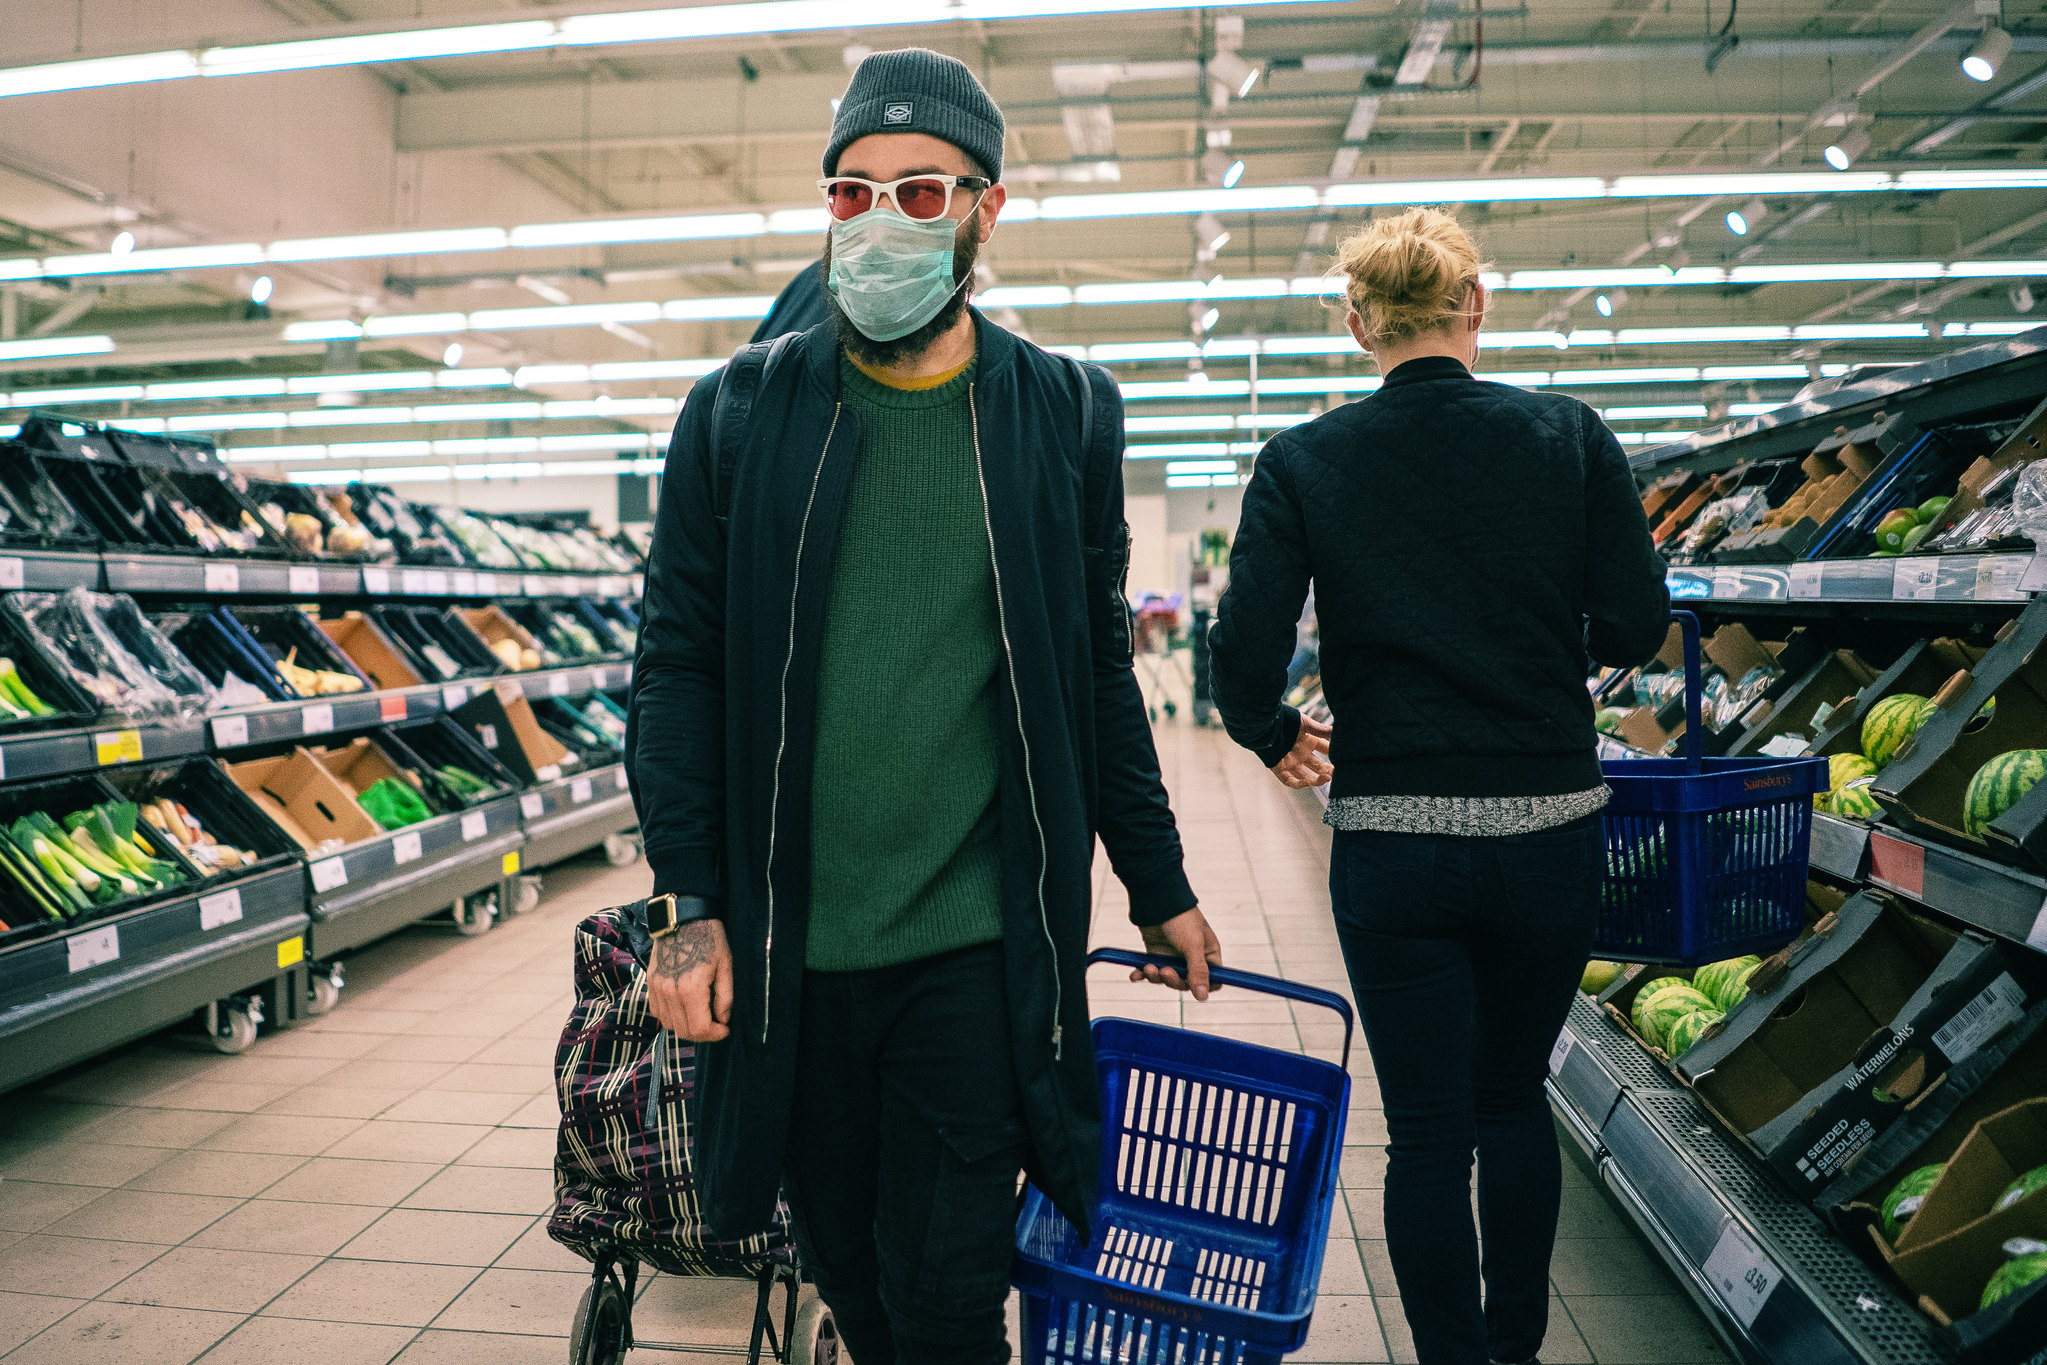 A man wearing a face covering shopping in a supermarket.